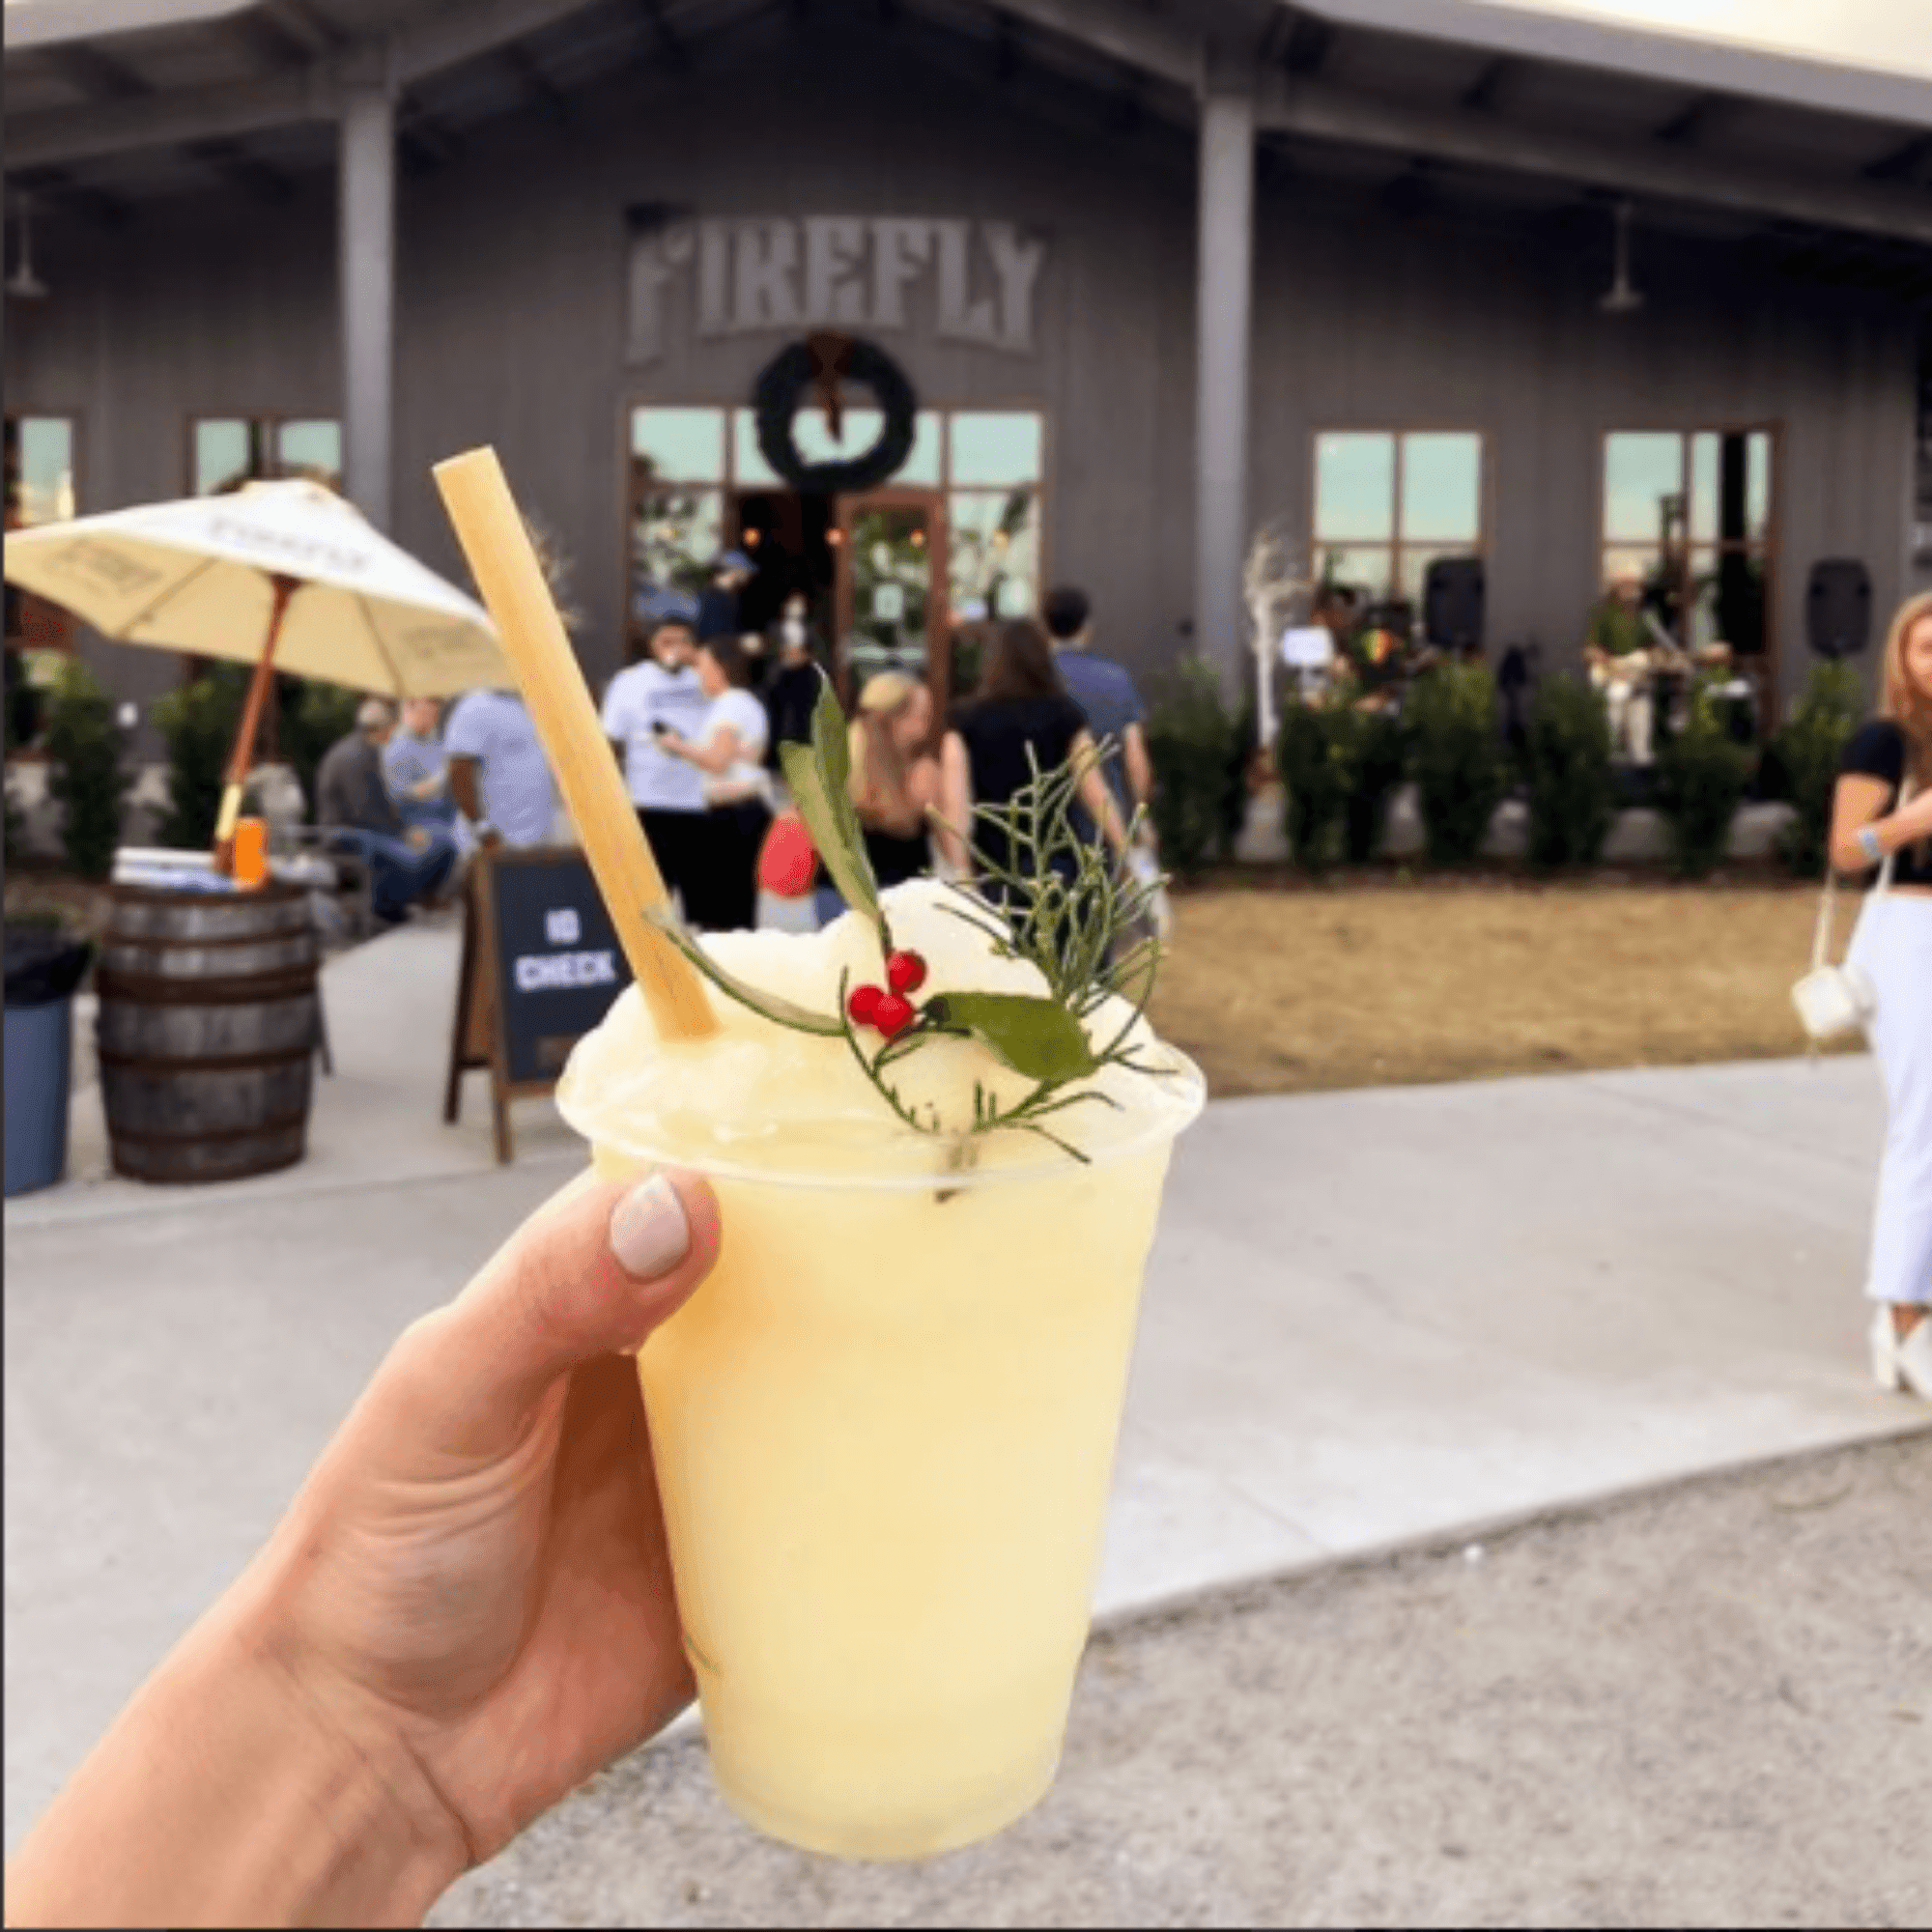 A hand is holding a clear cup filled with frozen lemonade, garnished with sprigs of greenery, berries, and a bamboo-like straw made from reed stems. The setting is outdoors, in front of a venue named 